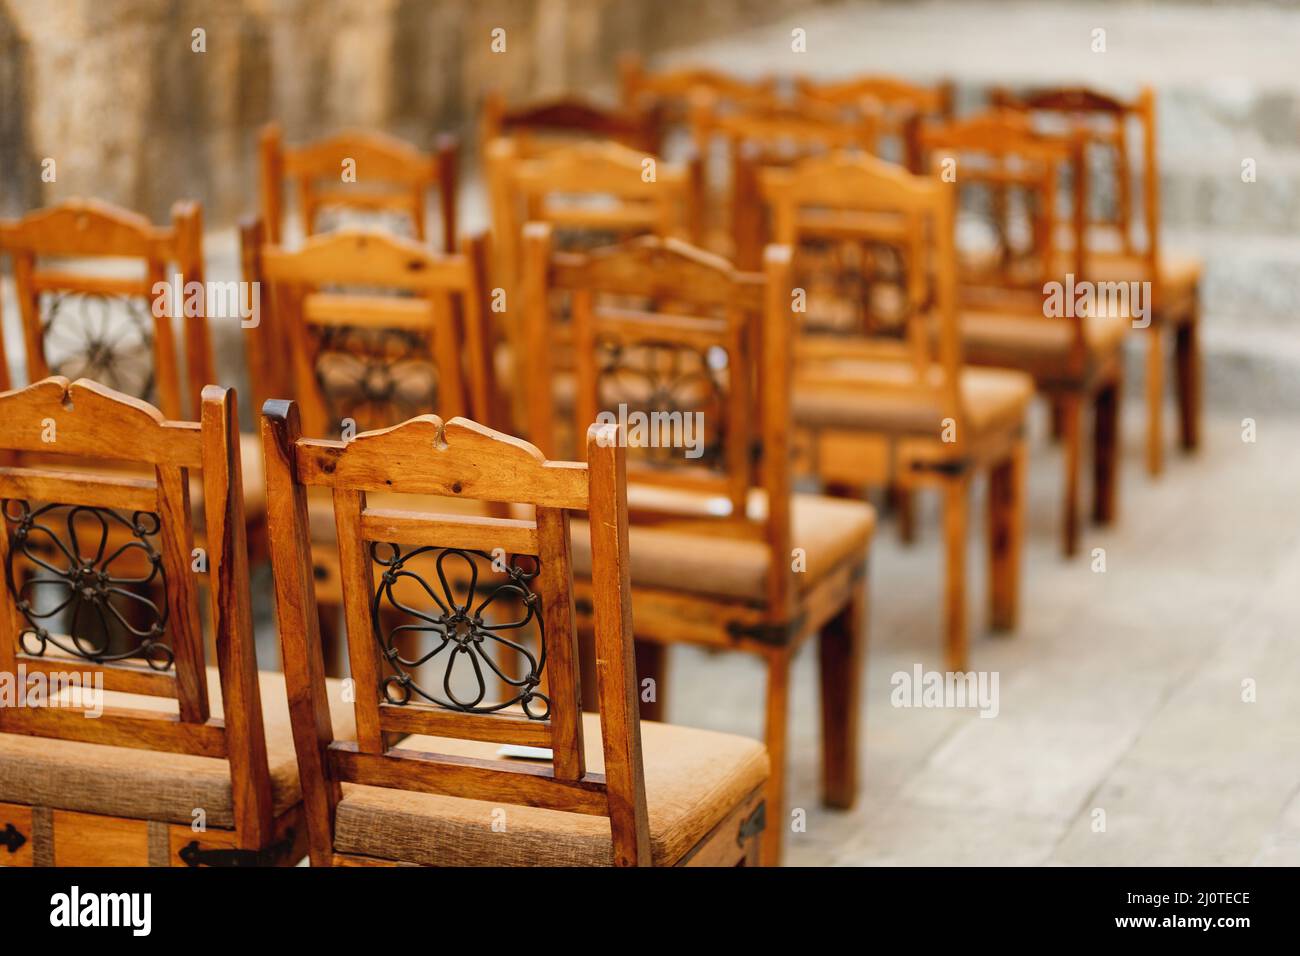 Wooden chairs with patterns on the backs stand in rows Stock Photo